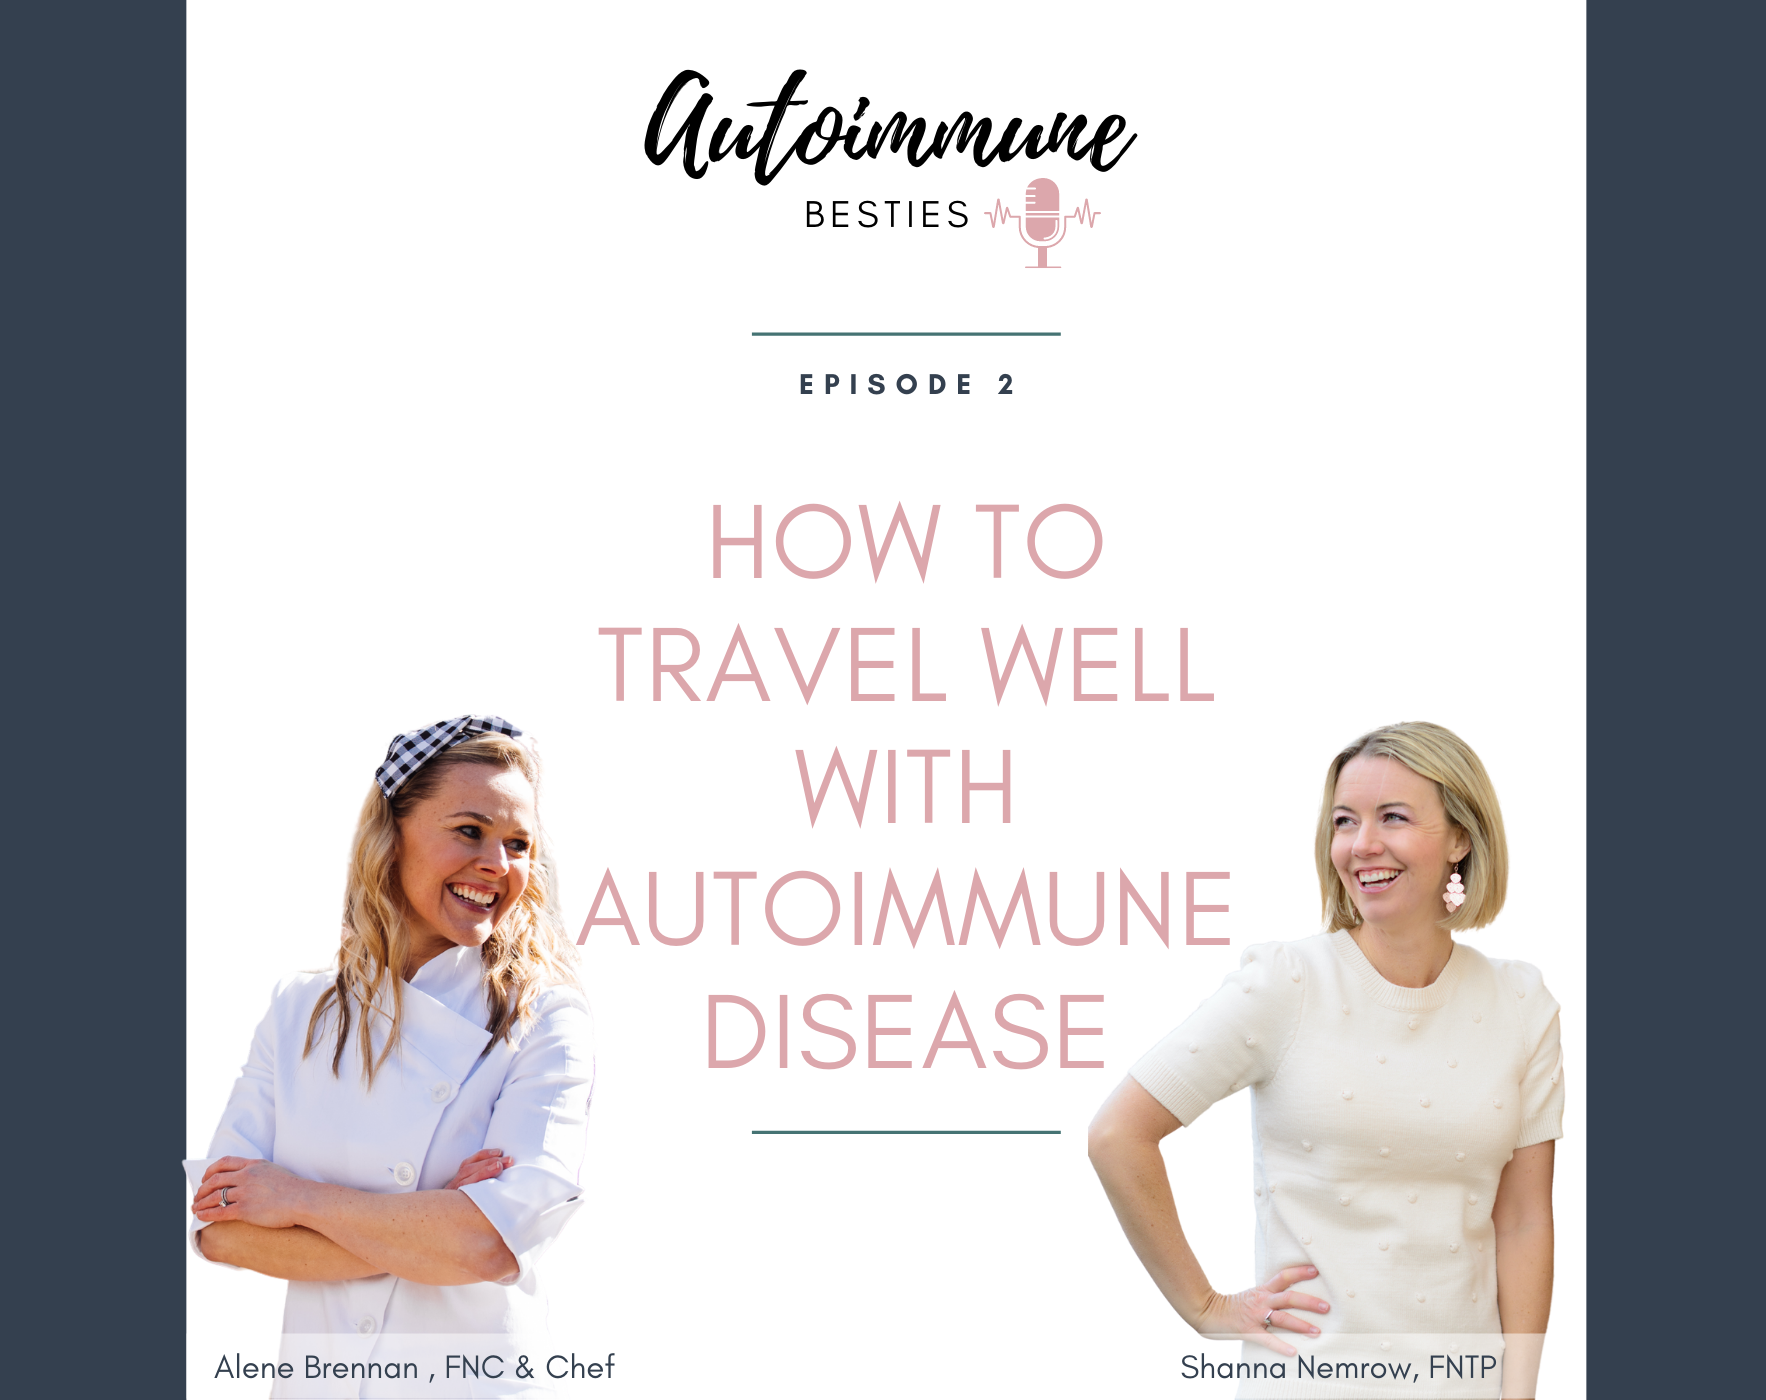 How to Travel Well With Autoimmune Disease